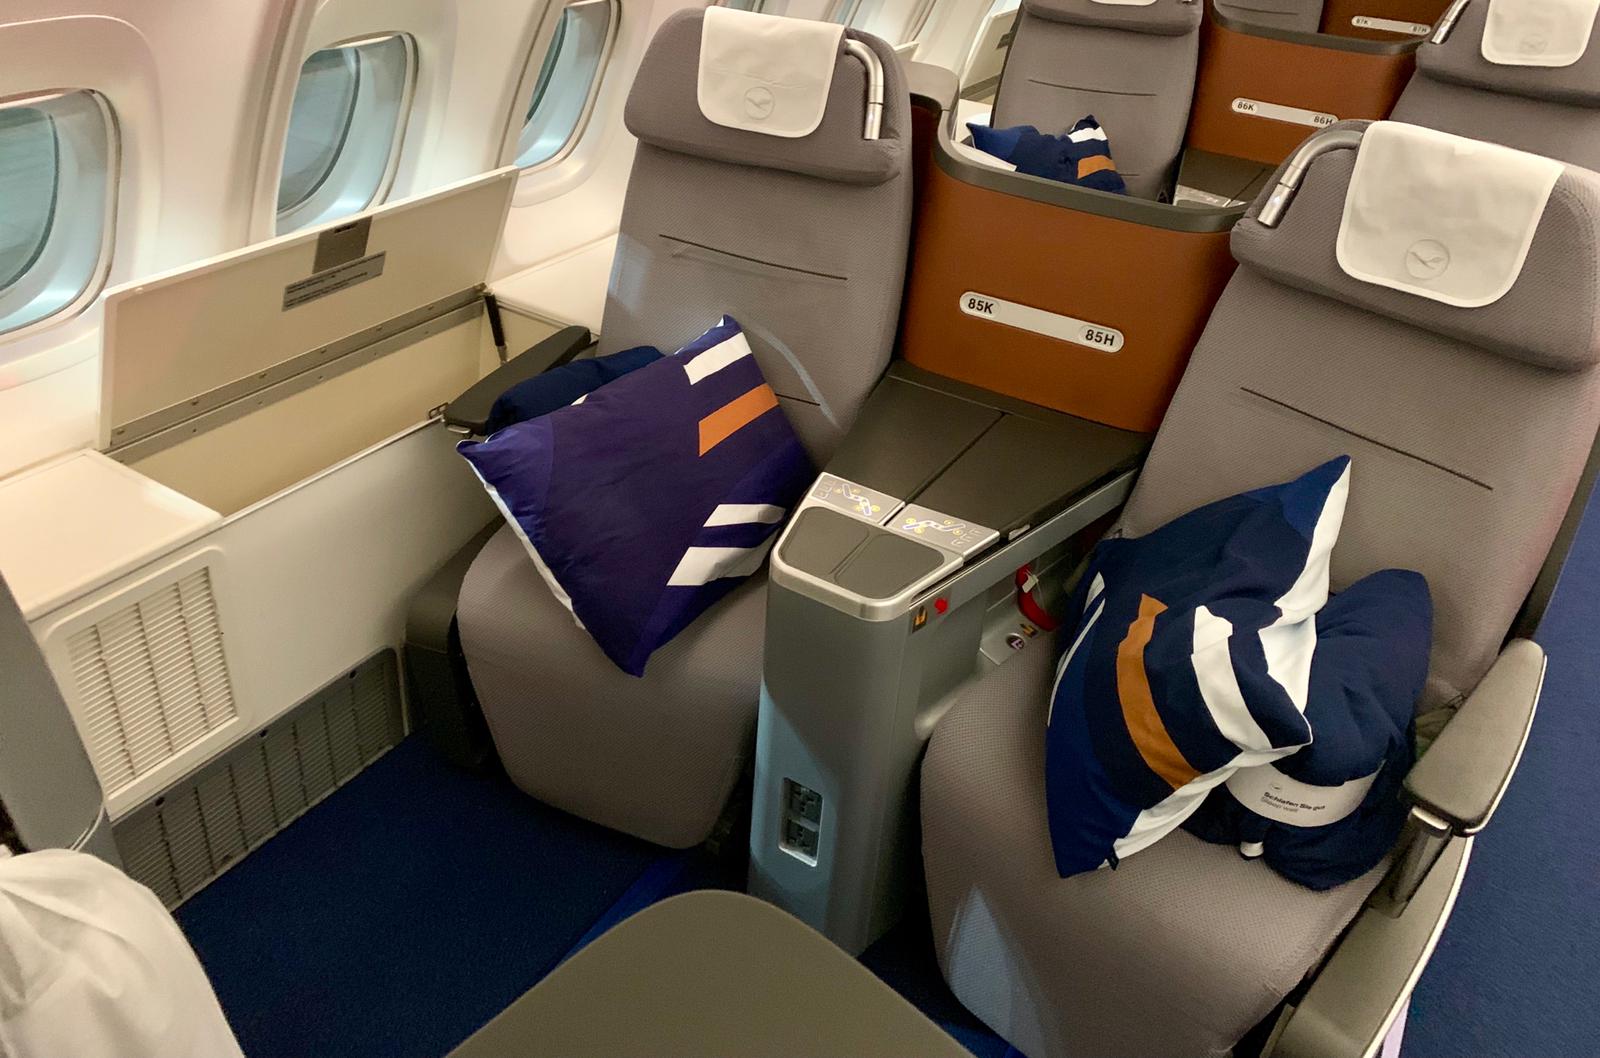 10. Future Improvements for Lufthansa's Business and First Class Cabins